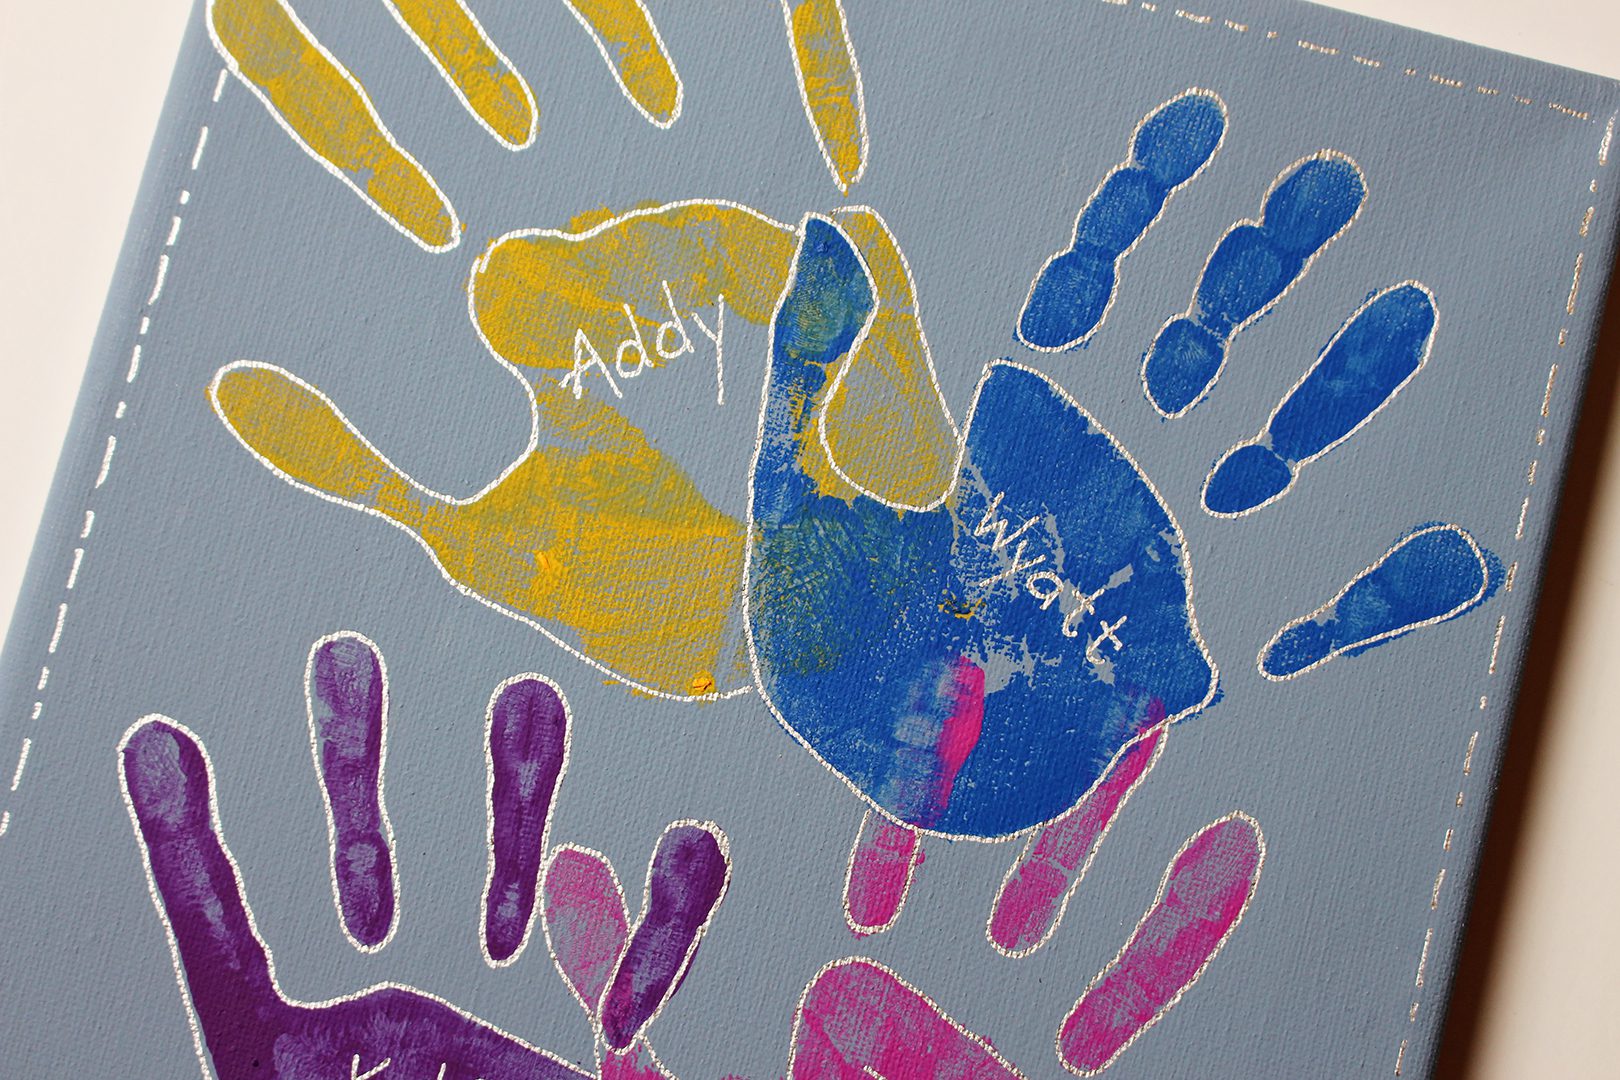 Painted handprints on a canvas with names written on them.